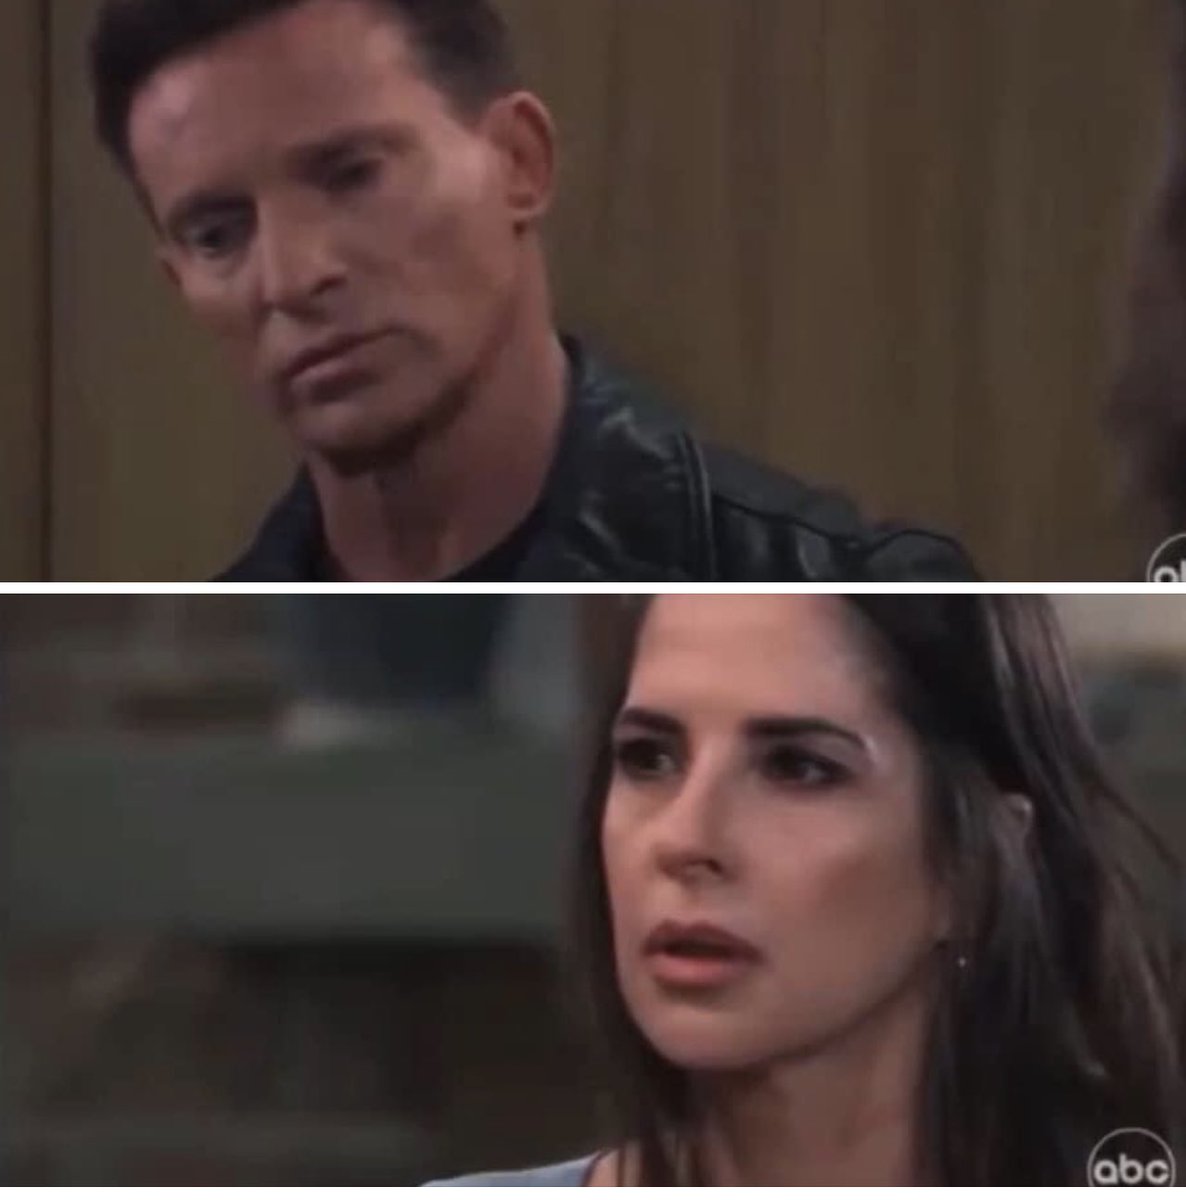 Looking forward 2 Sam & Jason tmrw!  Hoping they have a more relaxed dialogue, she is not as angry with him & they can show some progression. It’s obvious she is suppressing her feelings 4him by being as defensive as possible 2 protect herself. Something has to give soon. #JaSam